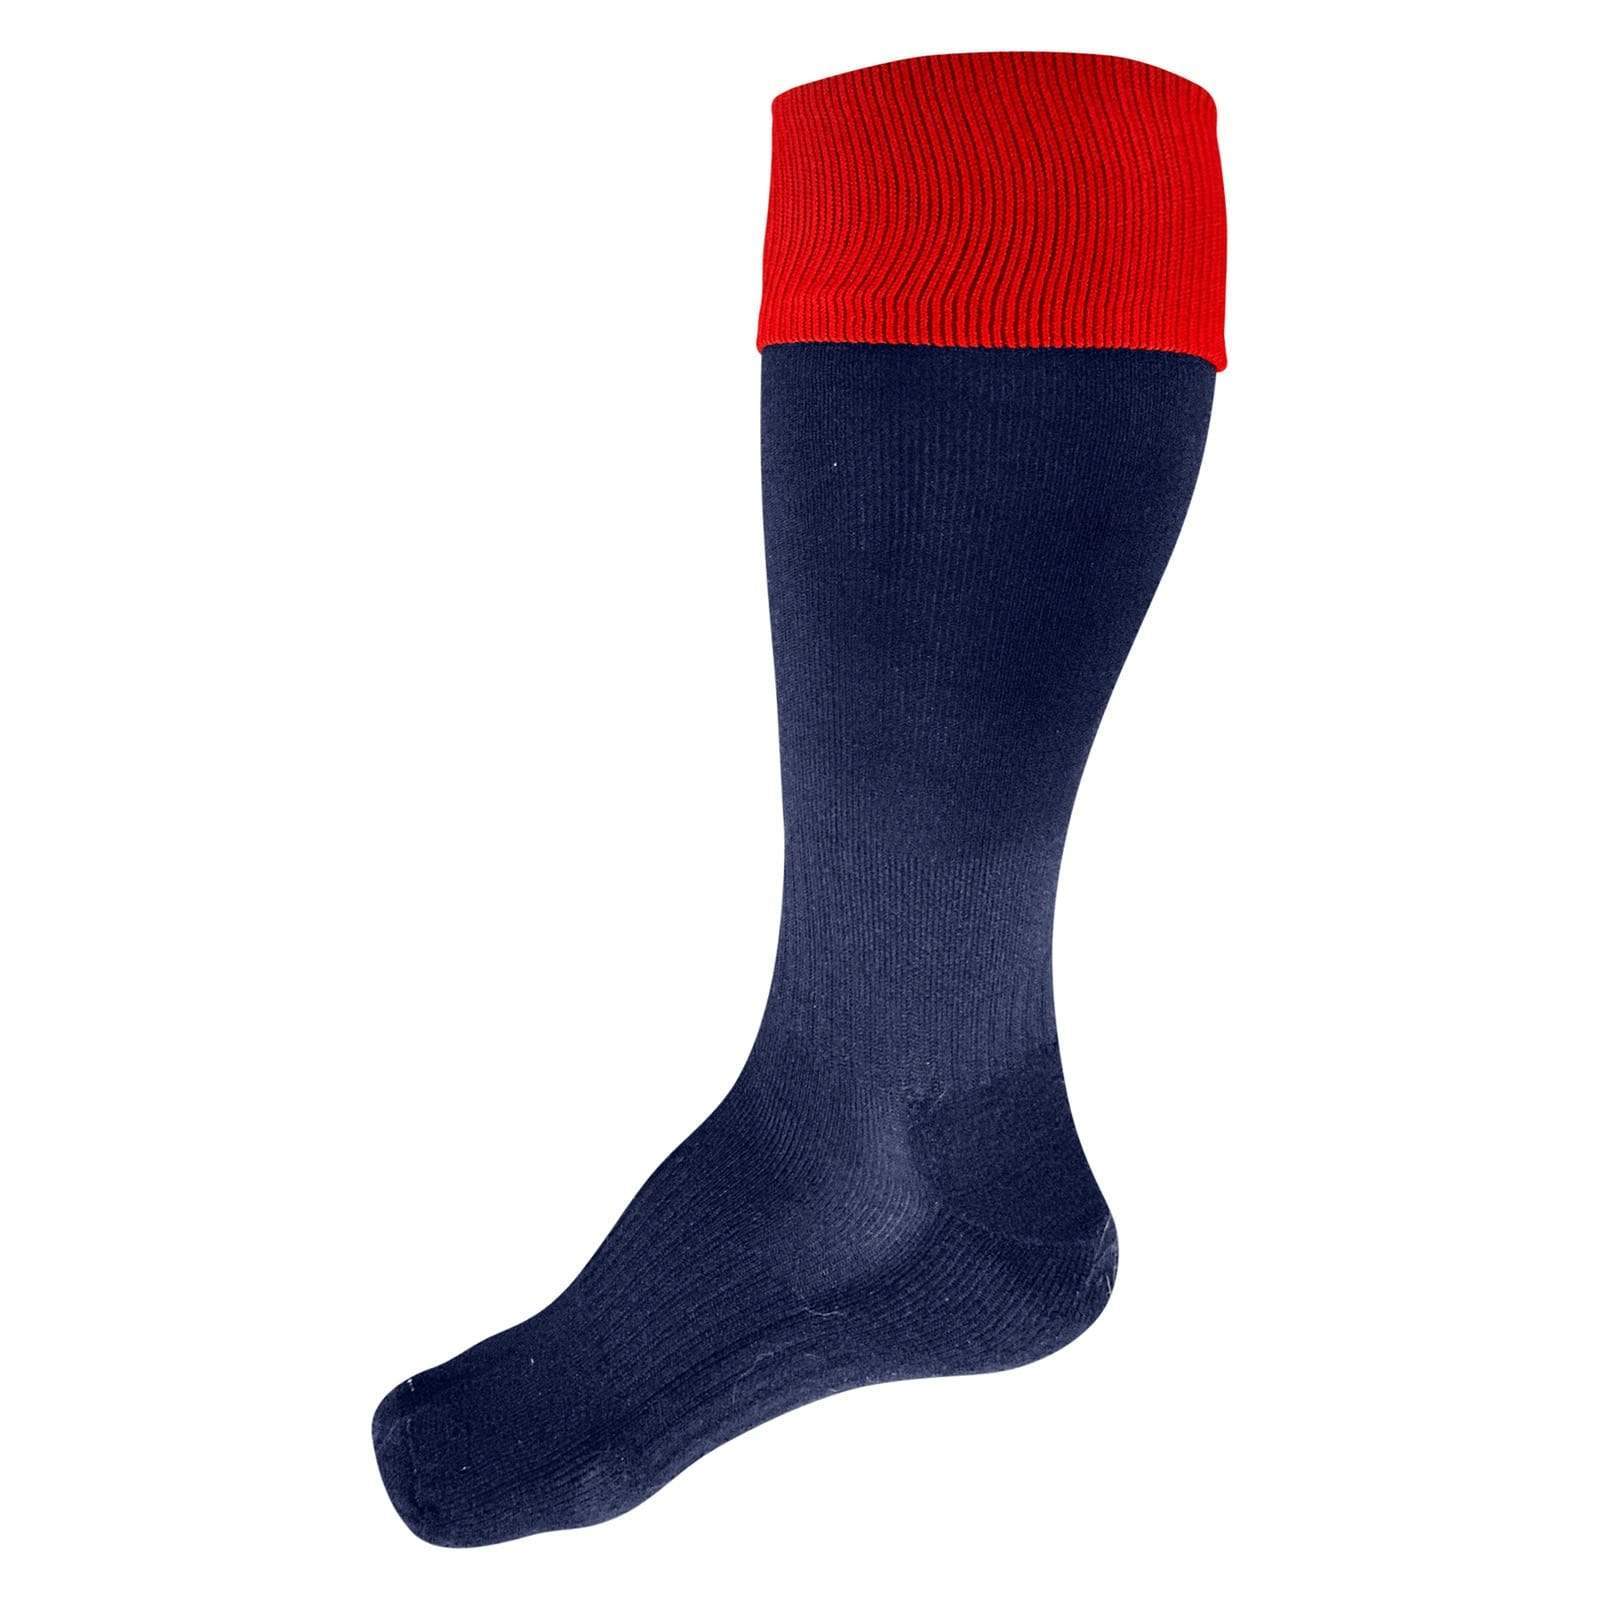 Rugby Imports Providence Rugby Performance Socks